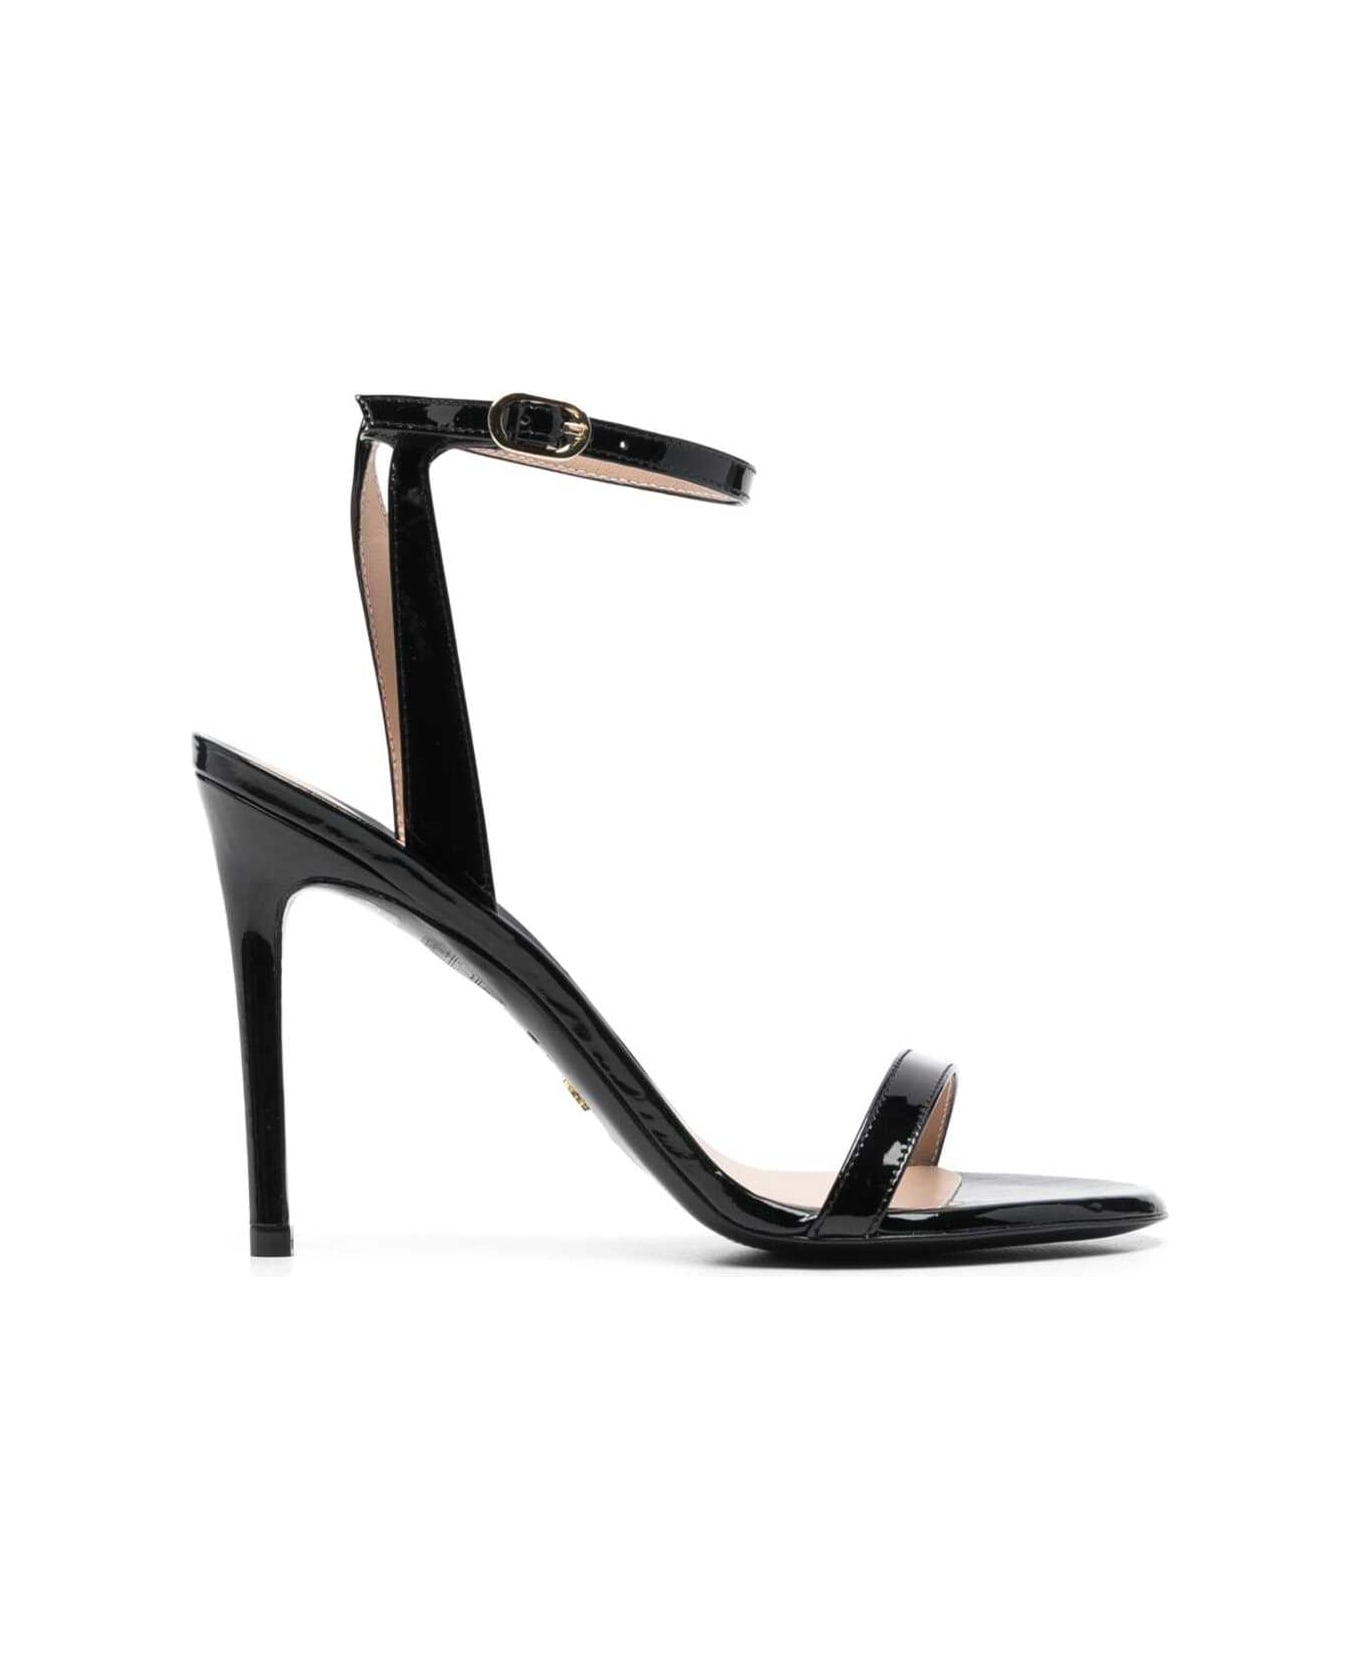 Stuart Weitzman 'barely Nude' Black Sandals With Stiletto Heel In Patent Leather Woman - Black